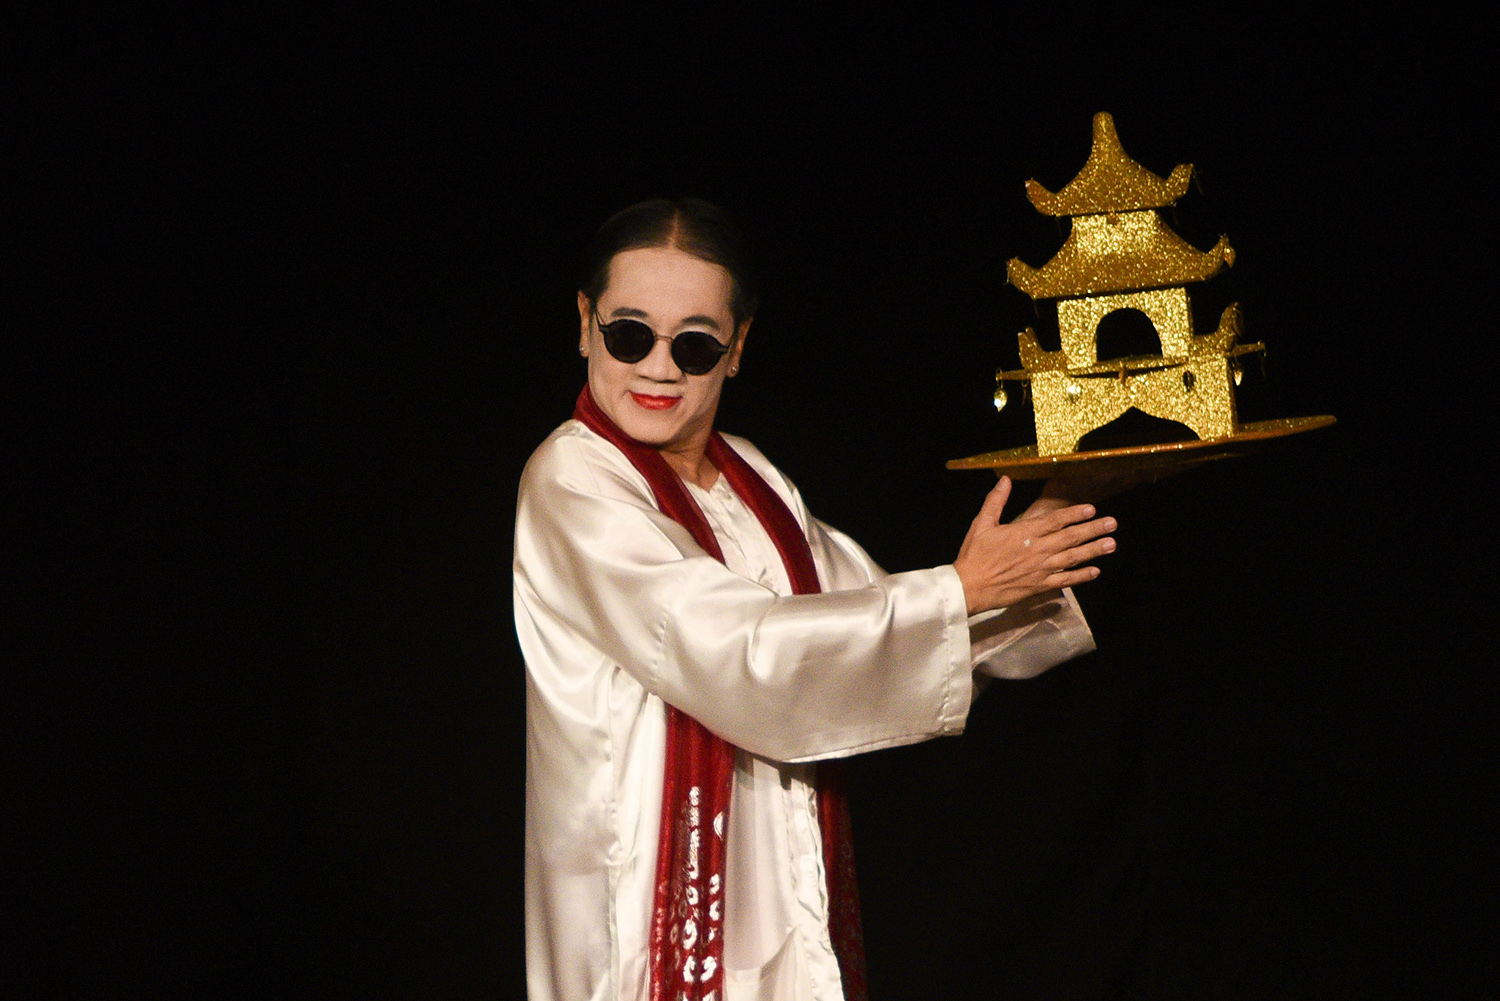 Comedian Thanh Loc during the show. The plot is set in south central region in the early 20th century with Loc playing a monk who has been promoted to become a public figure of the village despite his wife and children opposing.